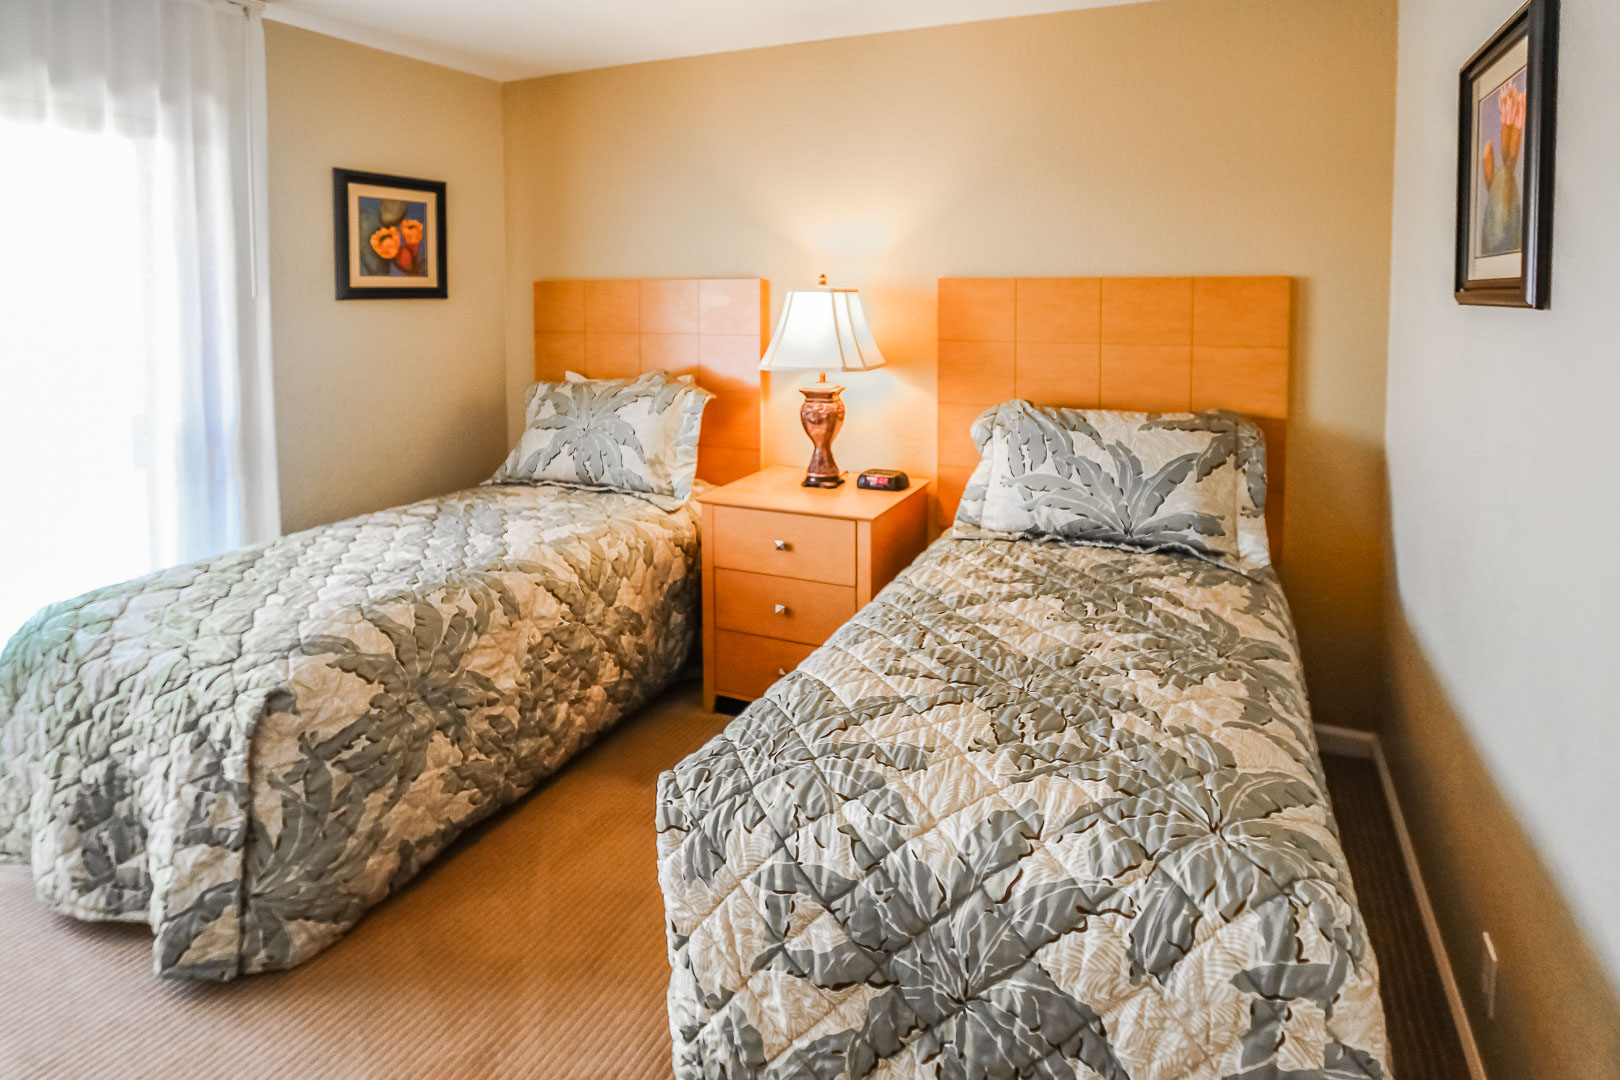 A 2 bedroom unit with double beds at VRI's Desert Vacation Villas in Palm Springs California.